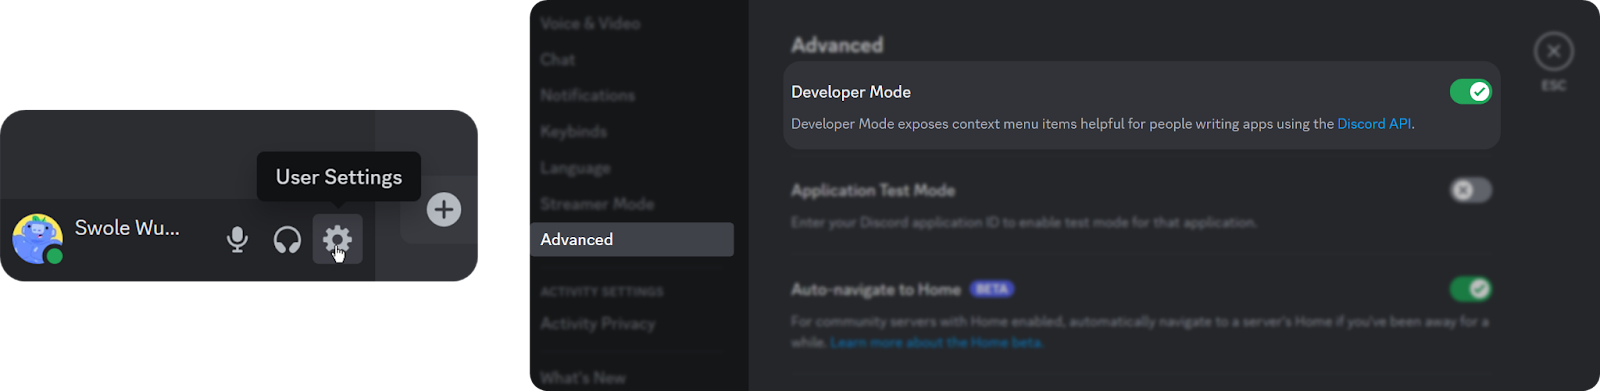 Steps to turn on Developer Mode in Discord